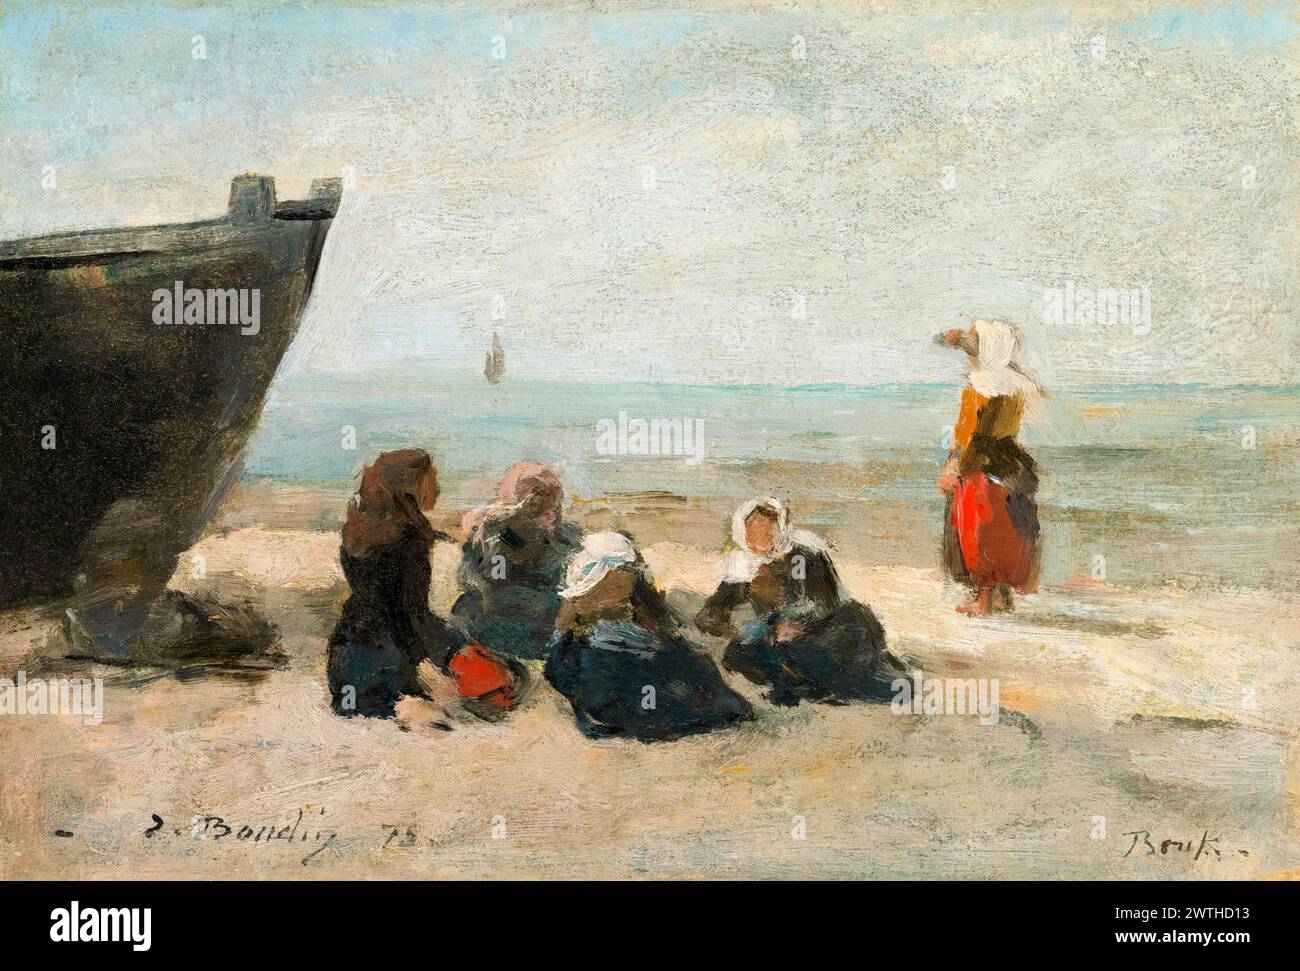 Eugène Boudin, Berck, Fisherwomen Watching for the Return of the Boats, painting in oil on panel, 1875 Stock Photo